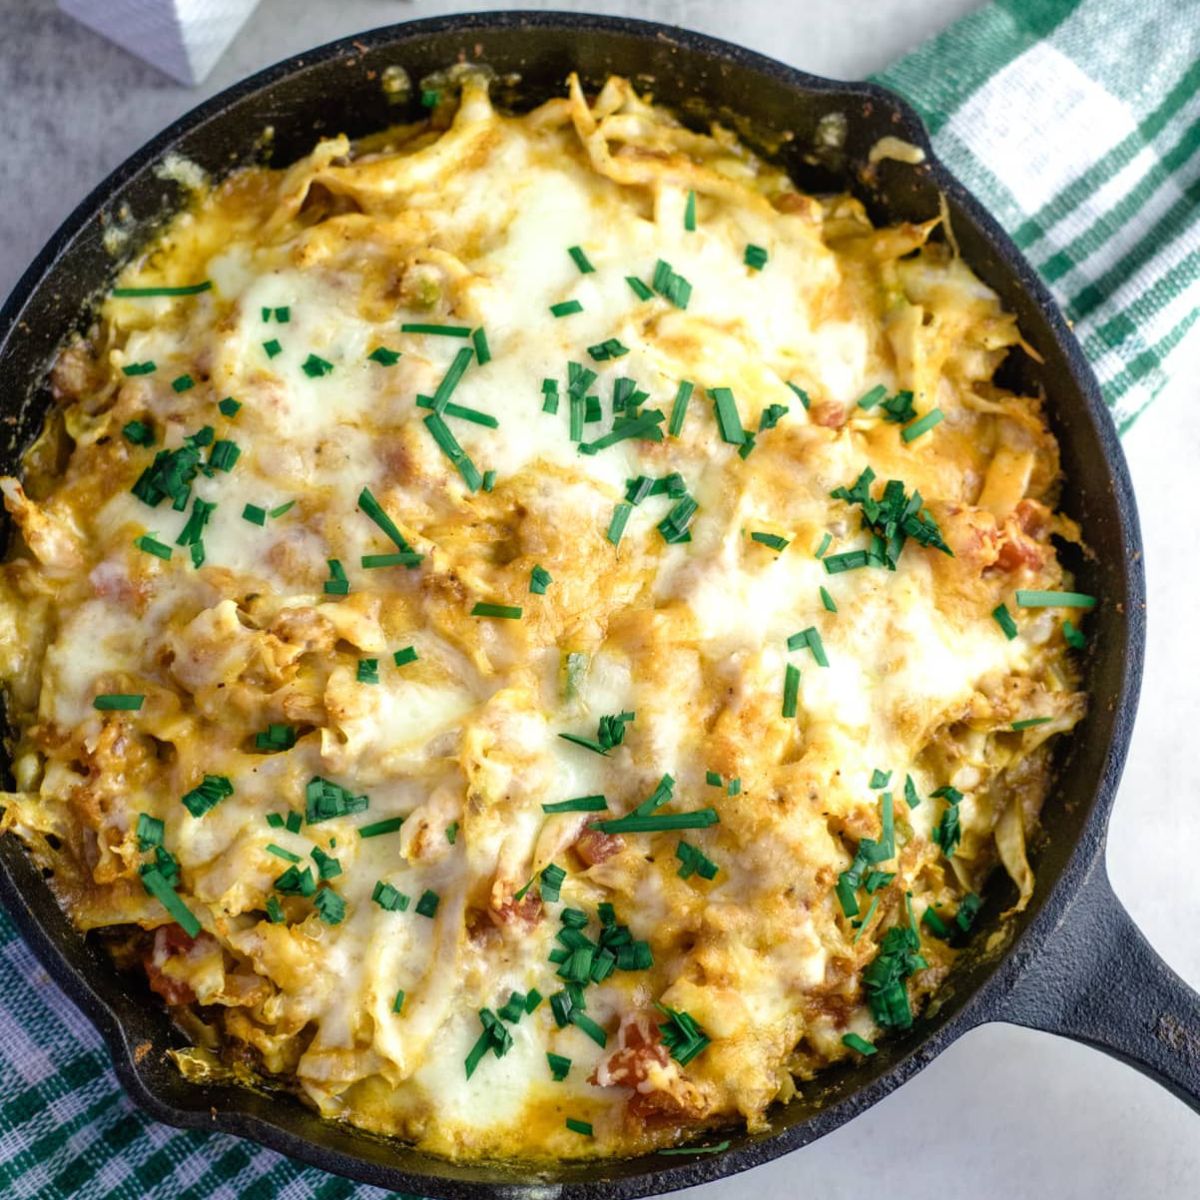 Cheesy Cabbage Casserole - Keto & Low Carb Vegetarian Recipes